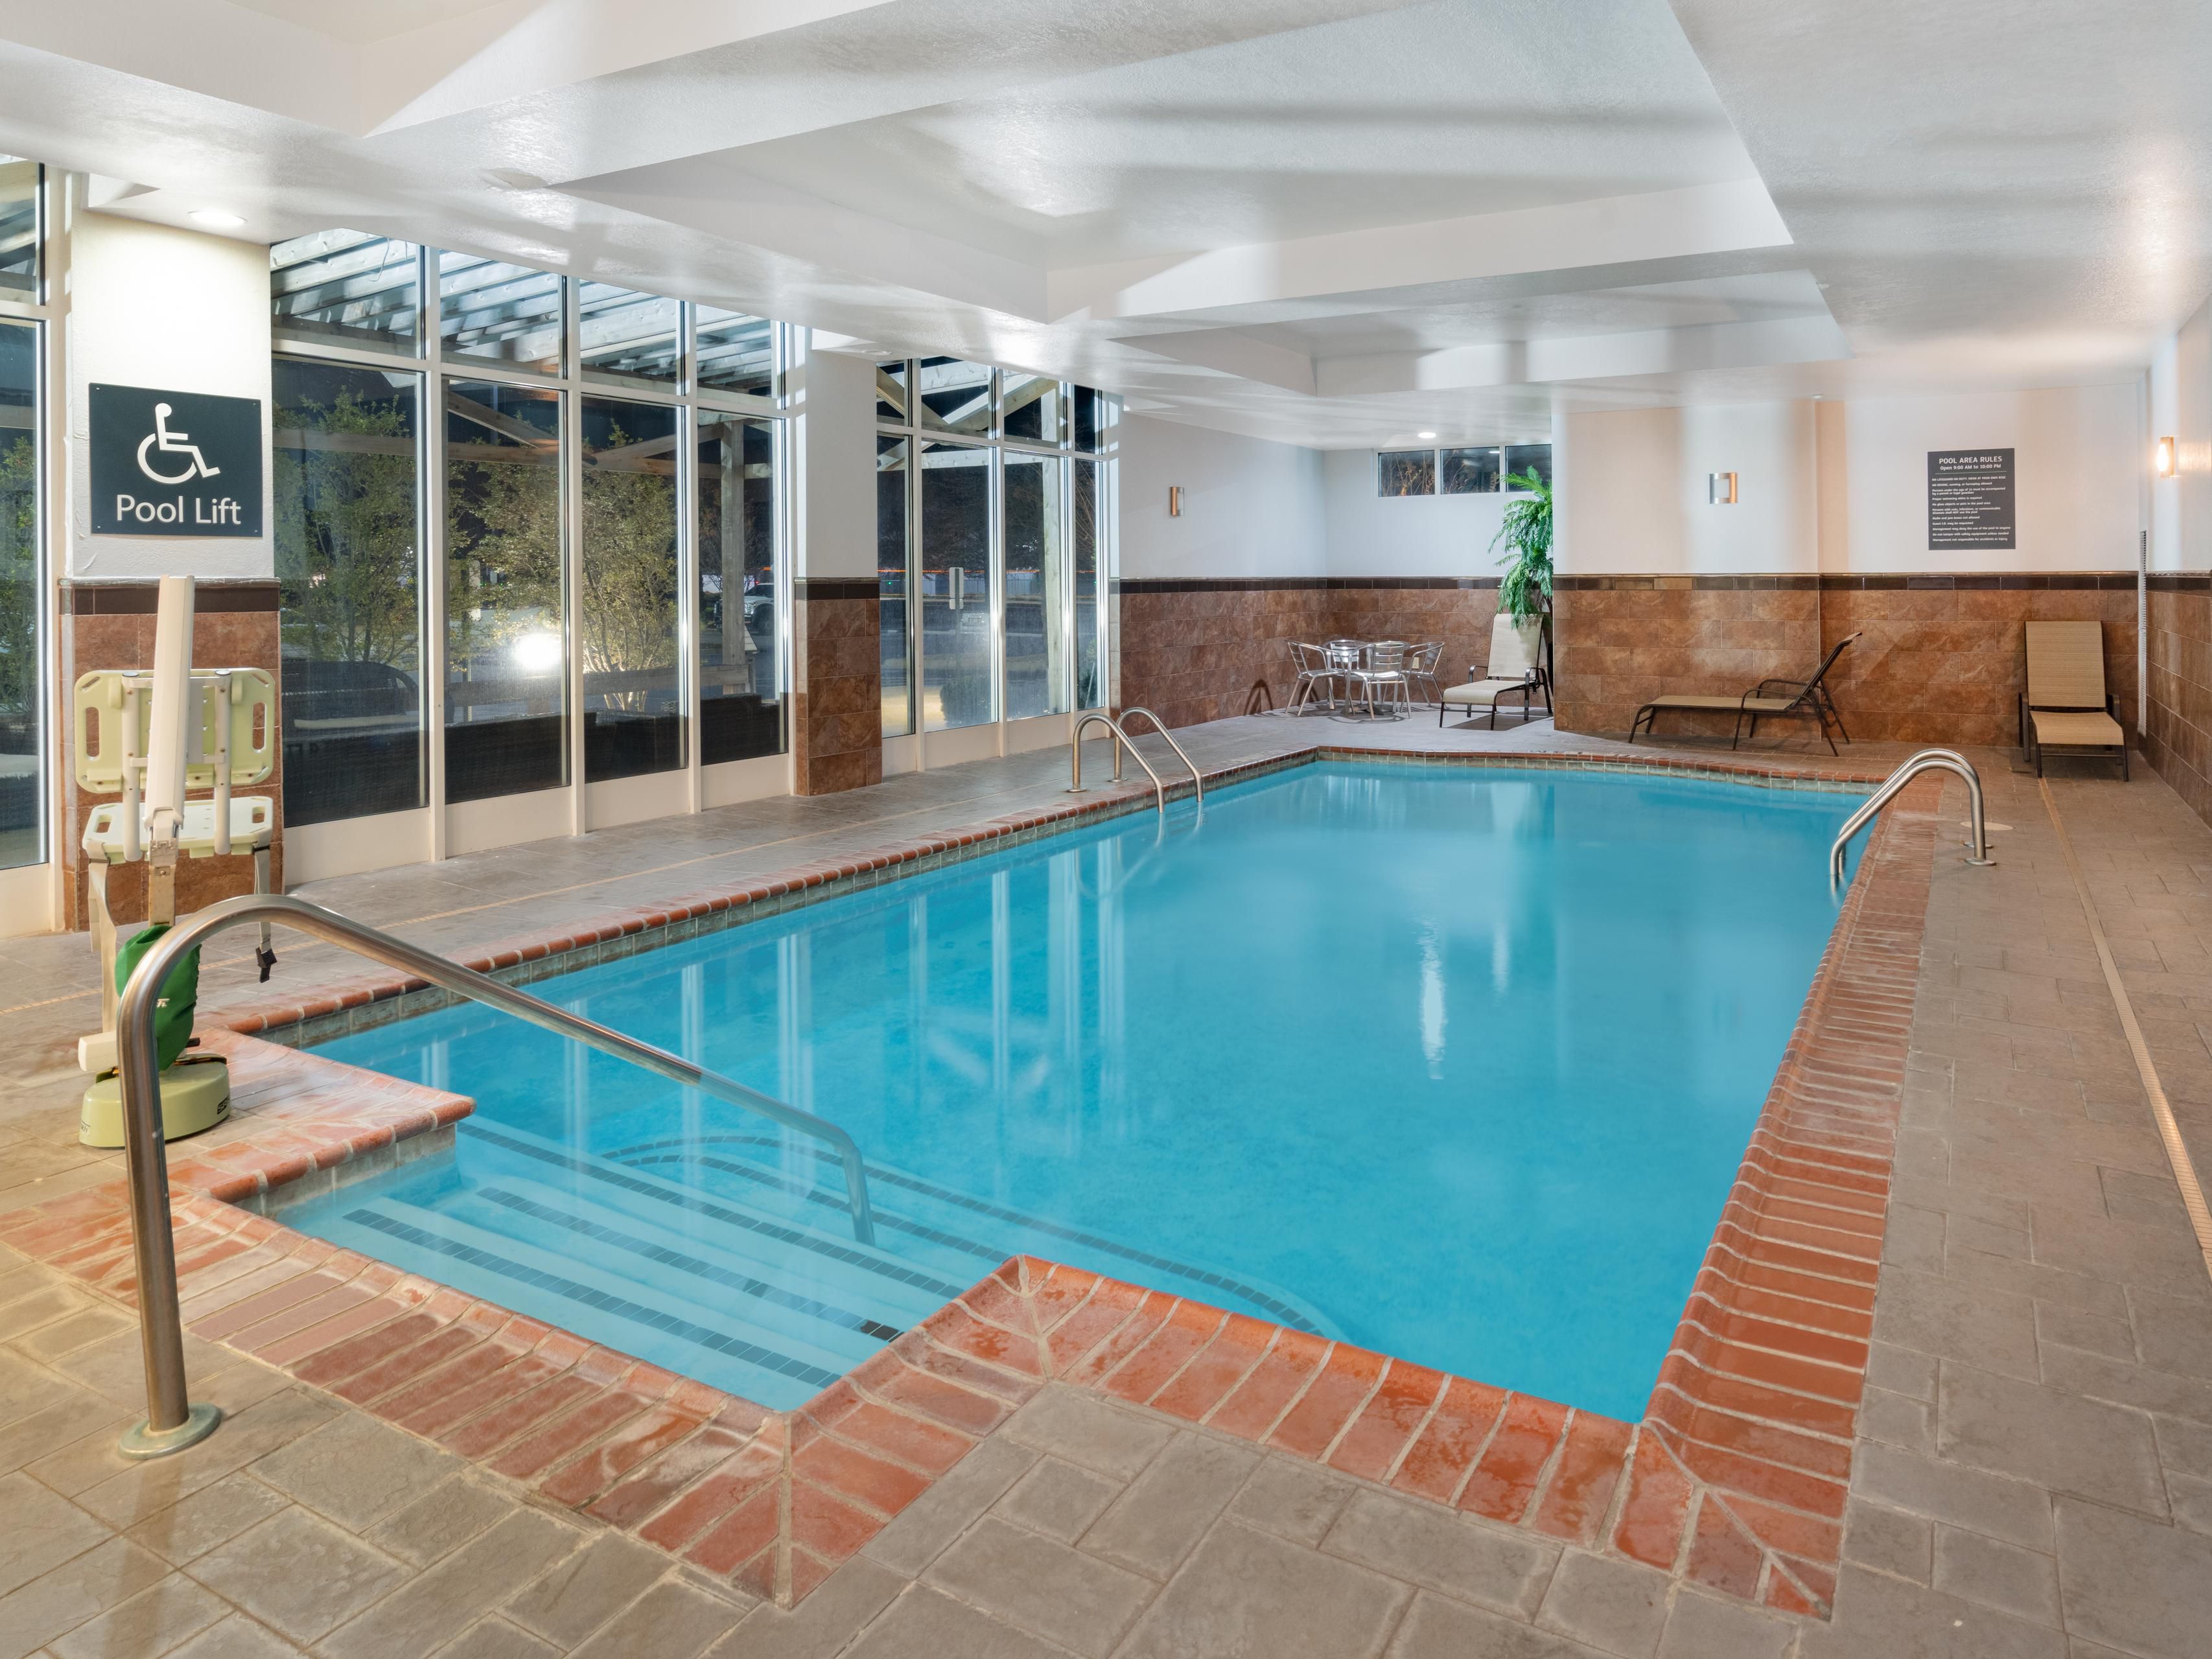 Take a dip in our indoor heated swimming pool, which is open for our guests from 9:-00 AM to 10:00 PM daily. 